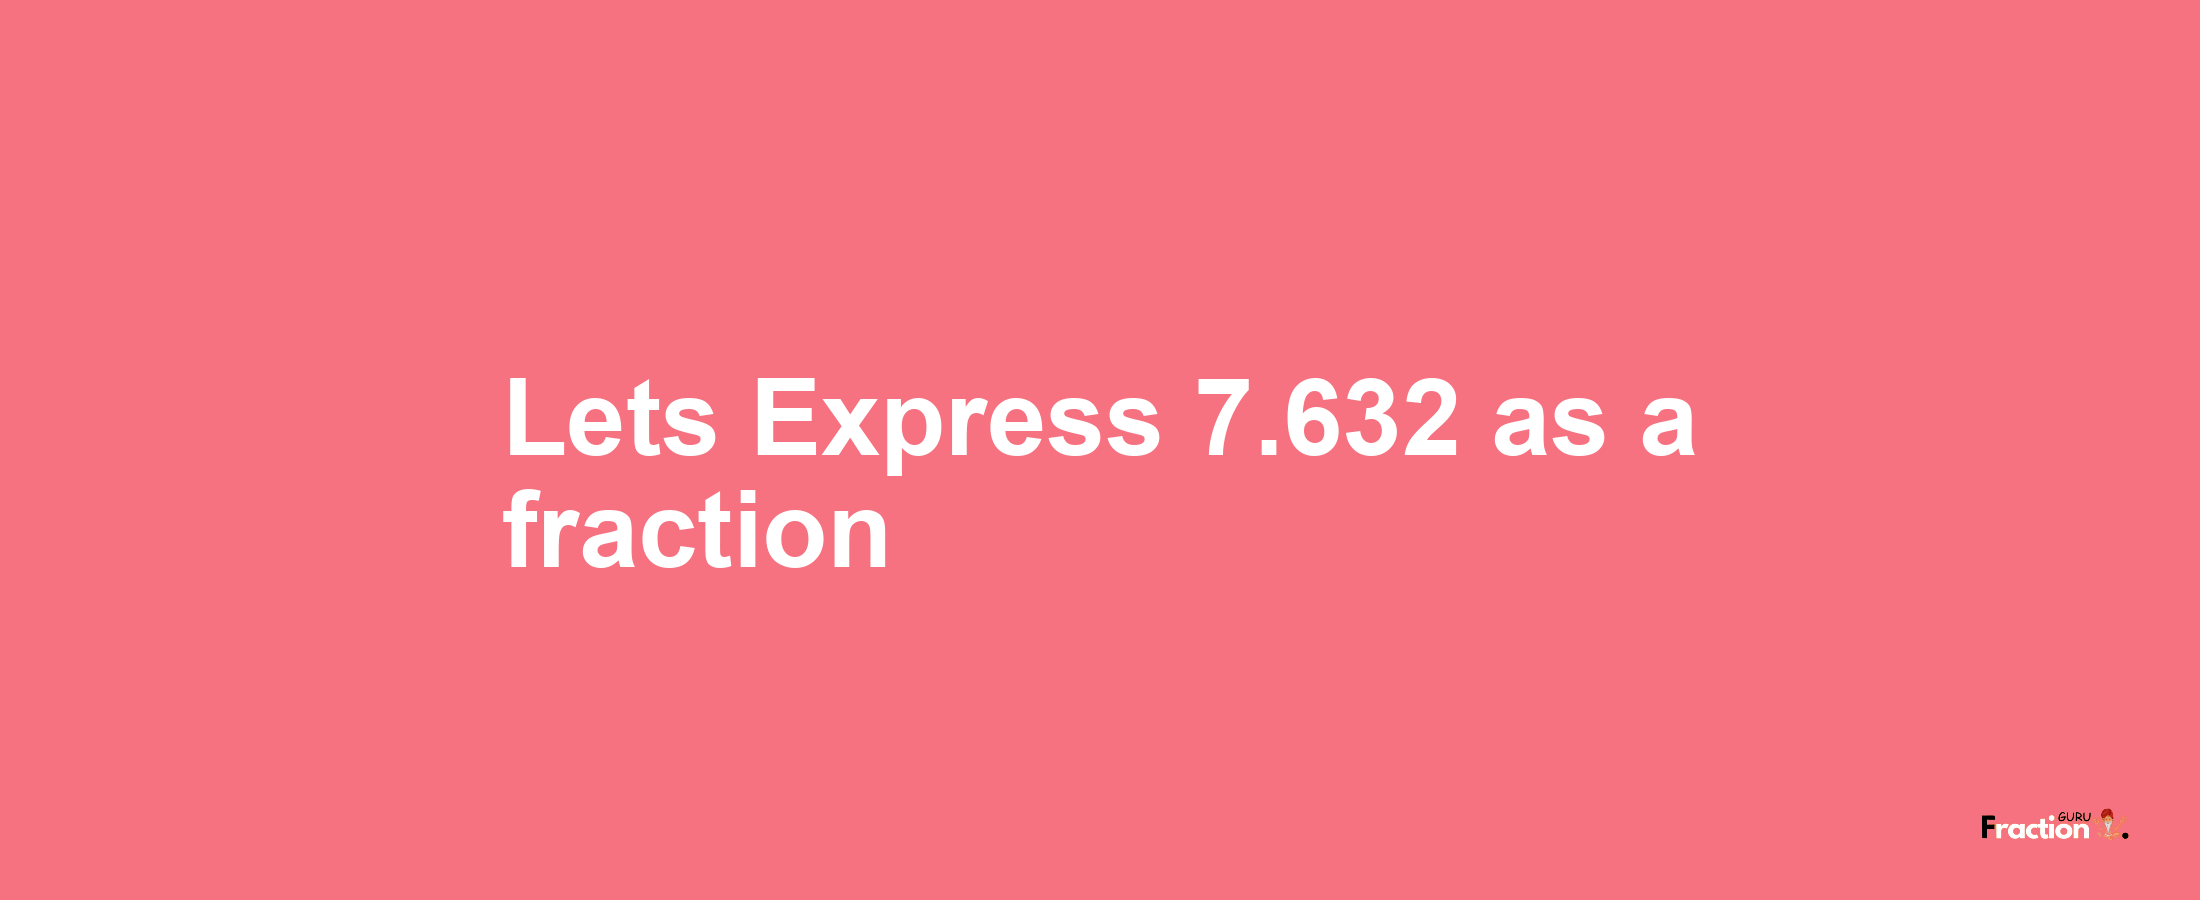 Lets Express 7.632 as afraction